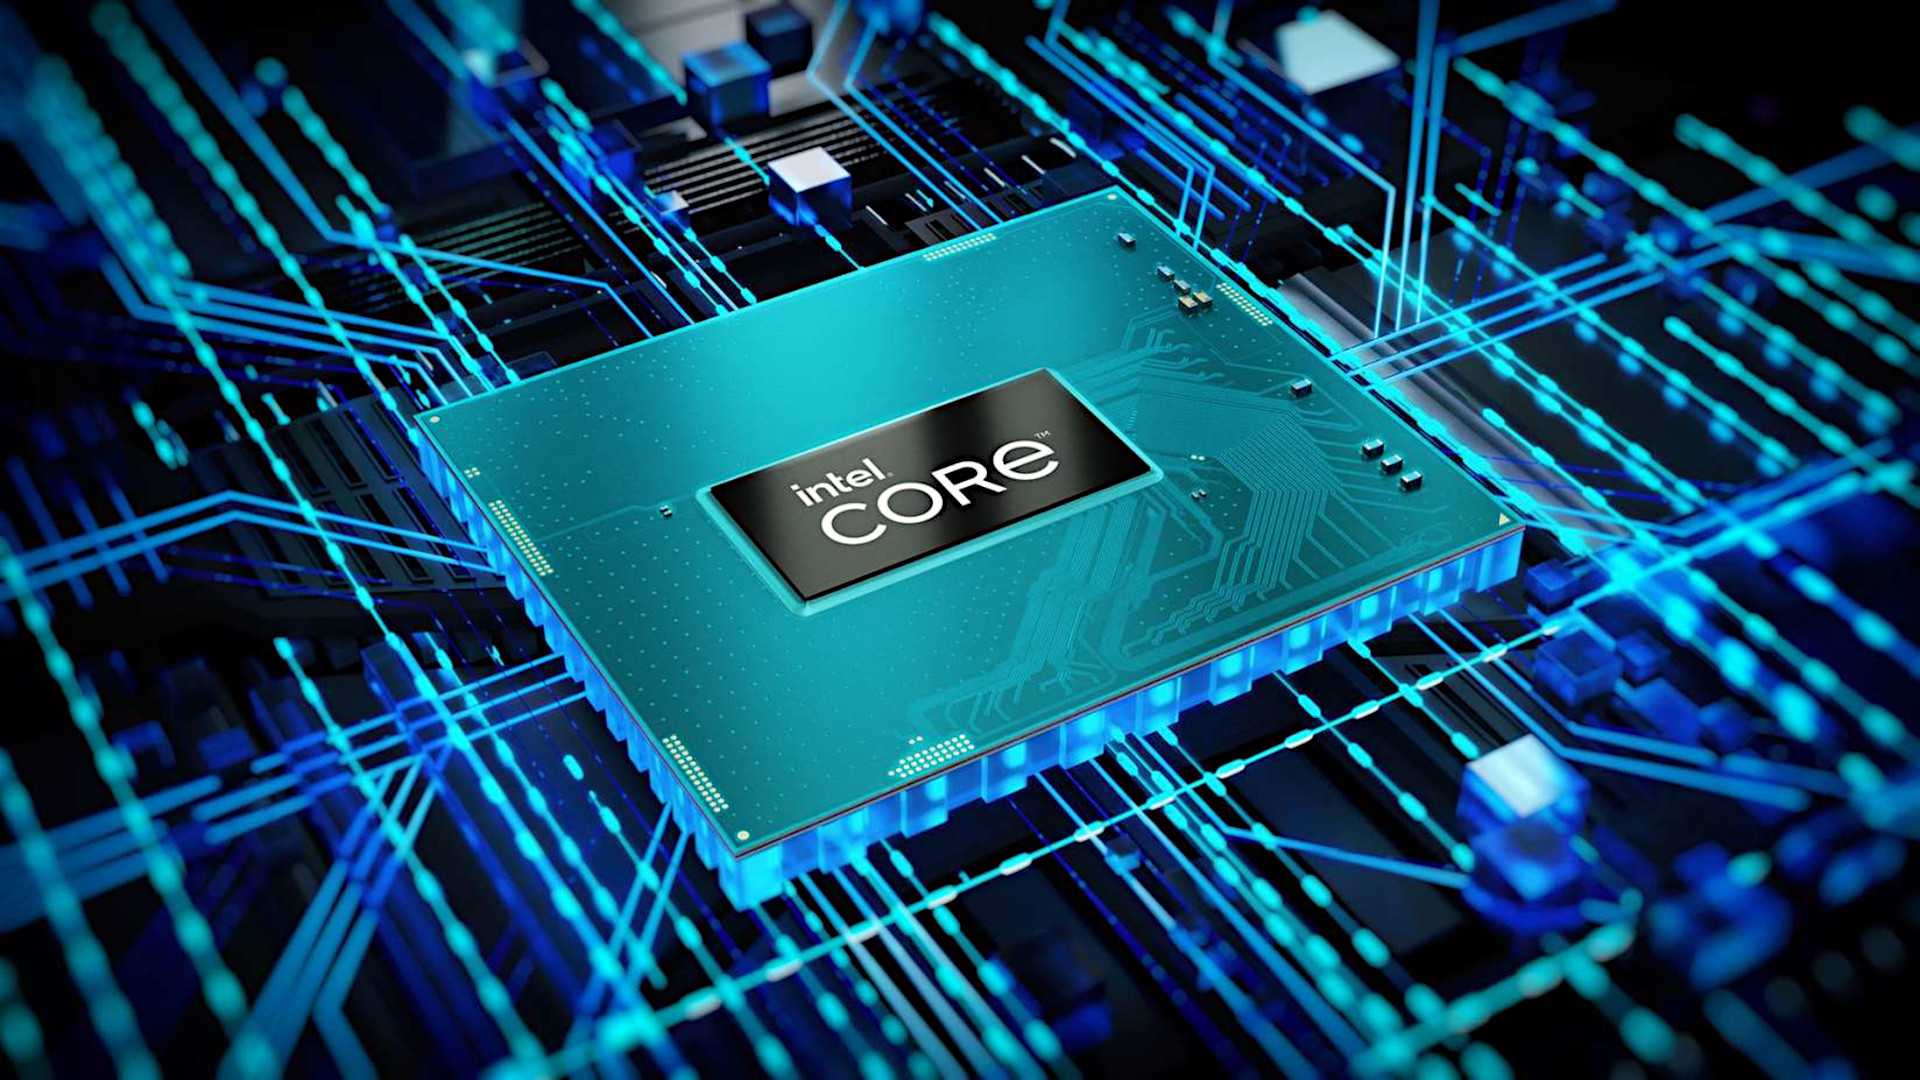 Intel Meteor Lake CPUs might boast support for ray tracing